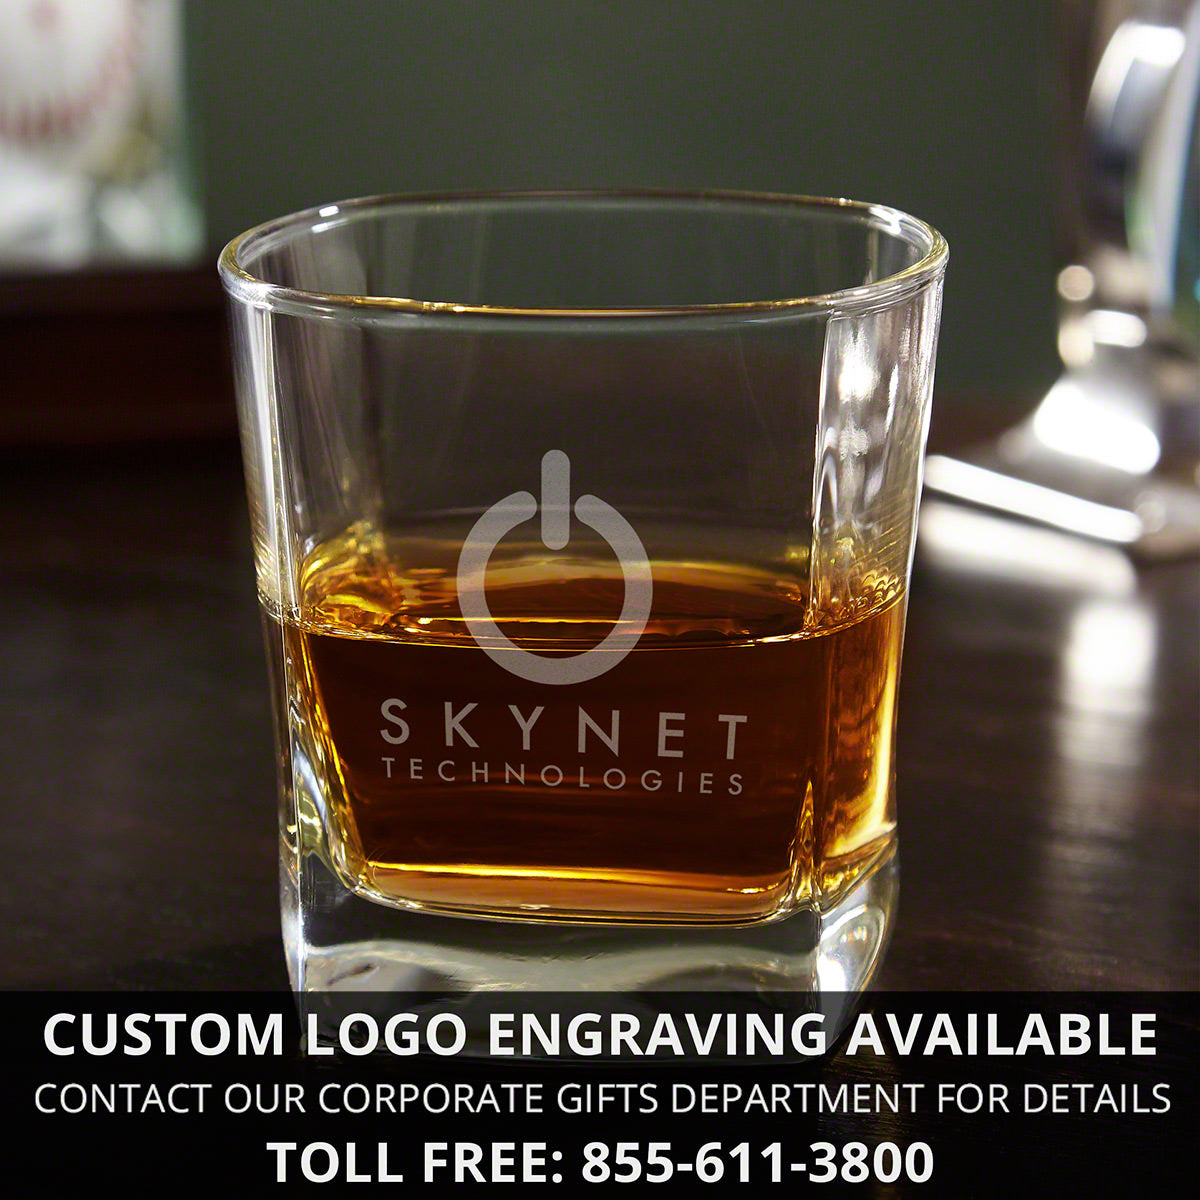 Personalized Whiskey Glasses and Cigar Gift Set